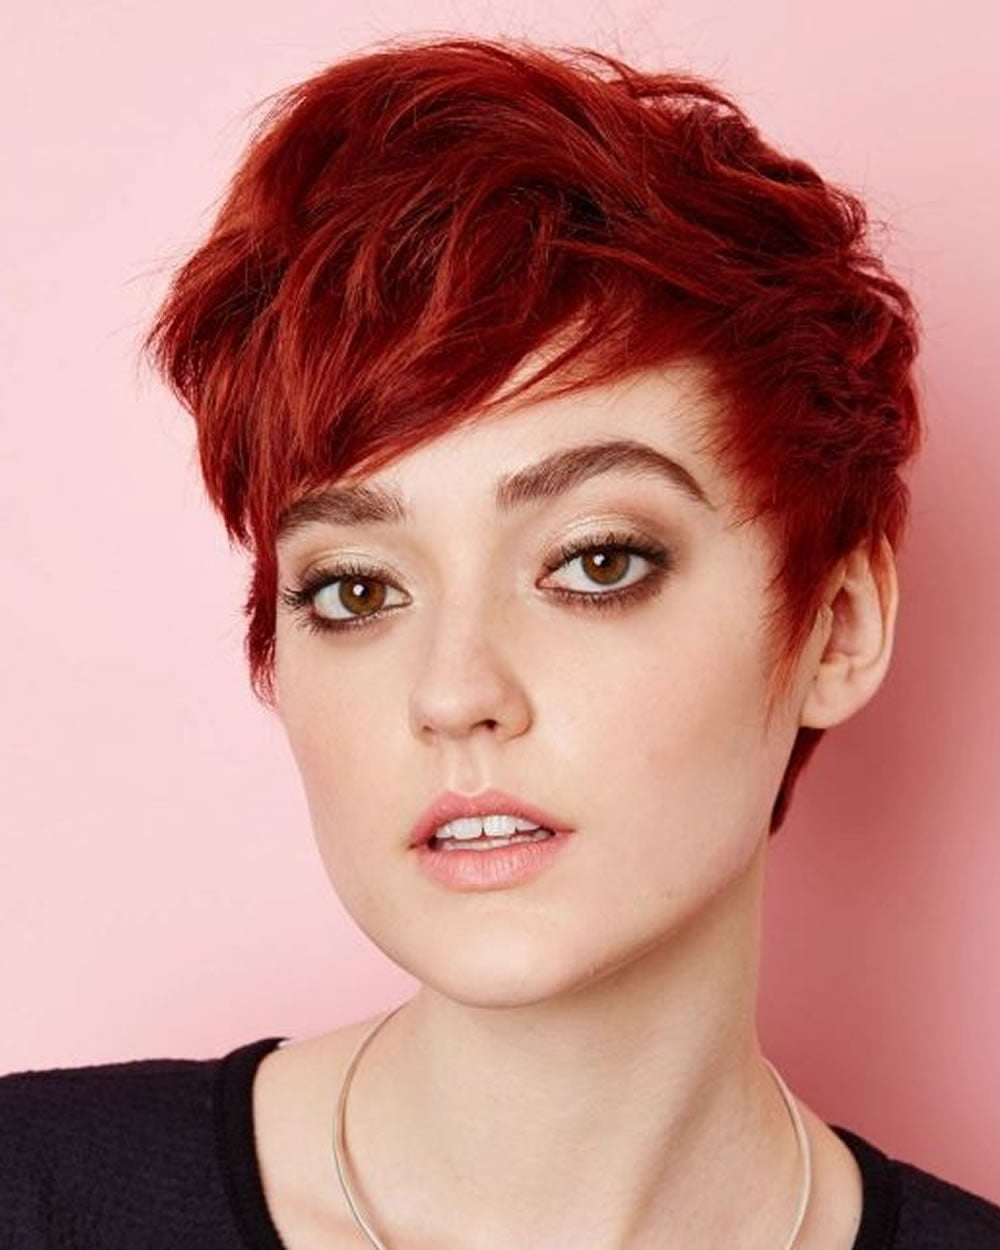 Short Hair Cuts for Women Bob and Pixie to Make You Feel Stylish – Page 8 – HAIRSTYLES